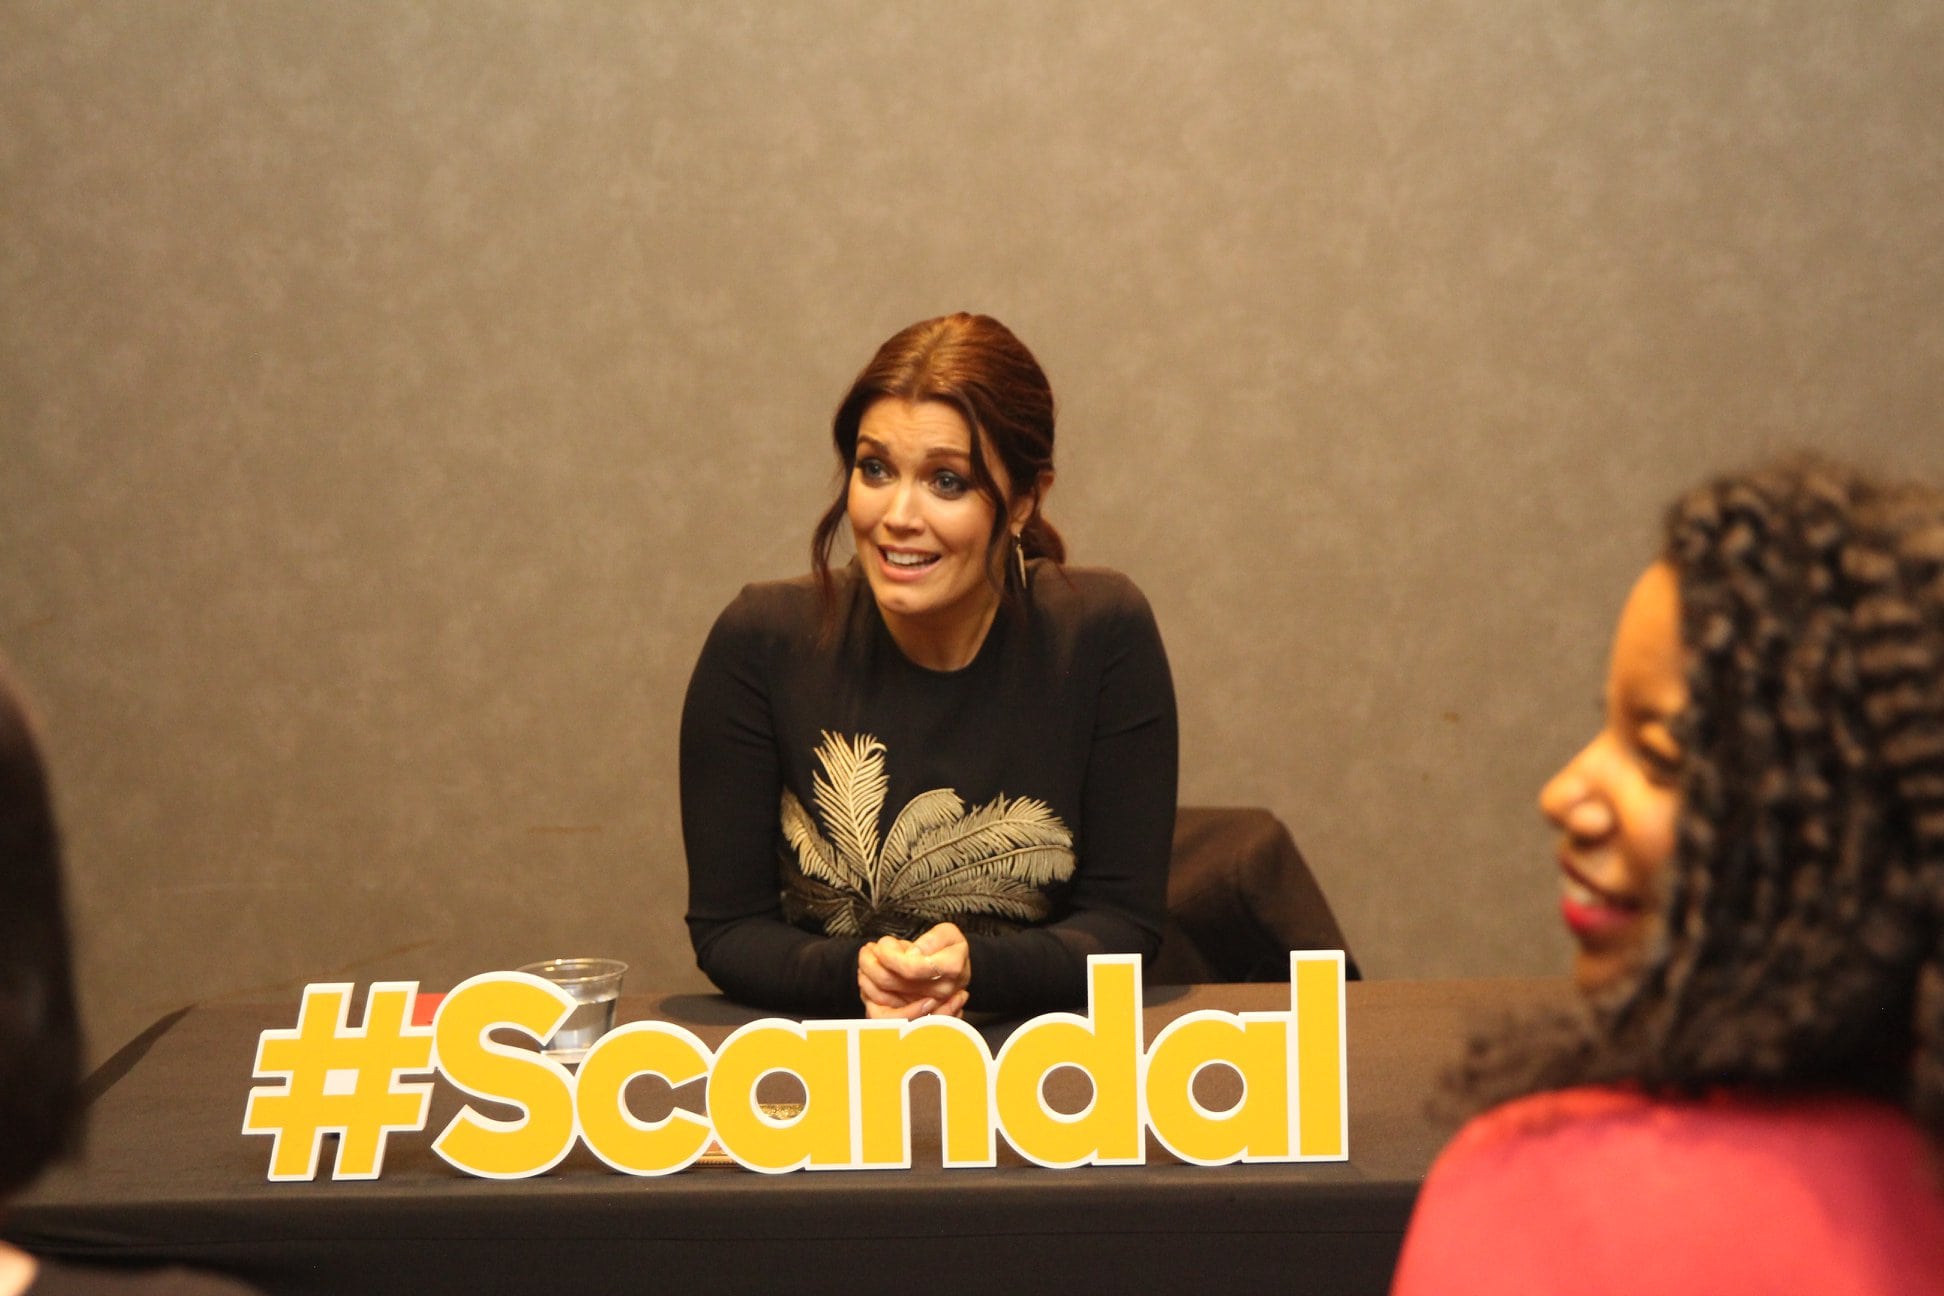 Bellamy Young Interview - A Wrinkle In Time and Scandal Crossover